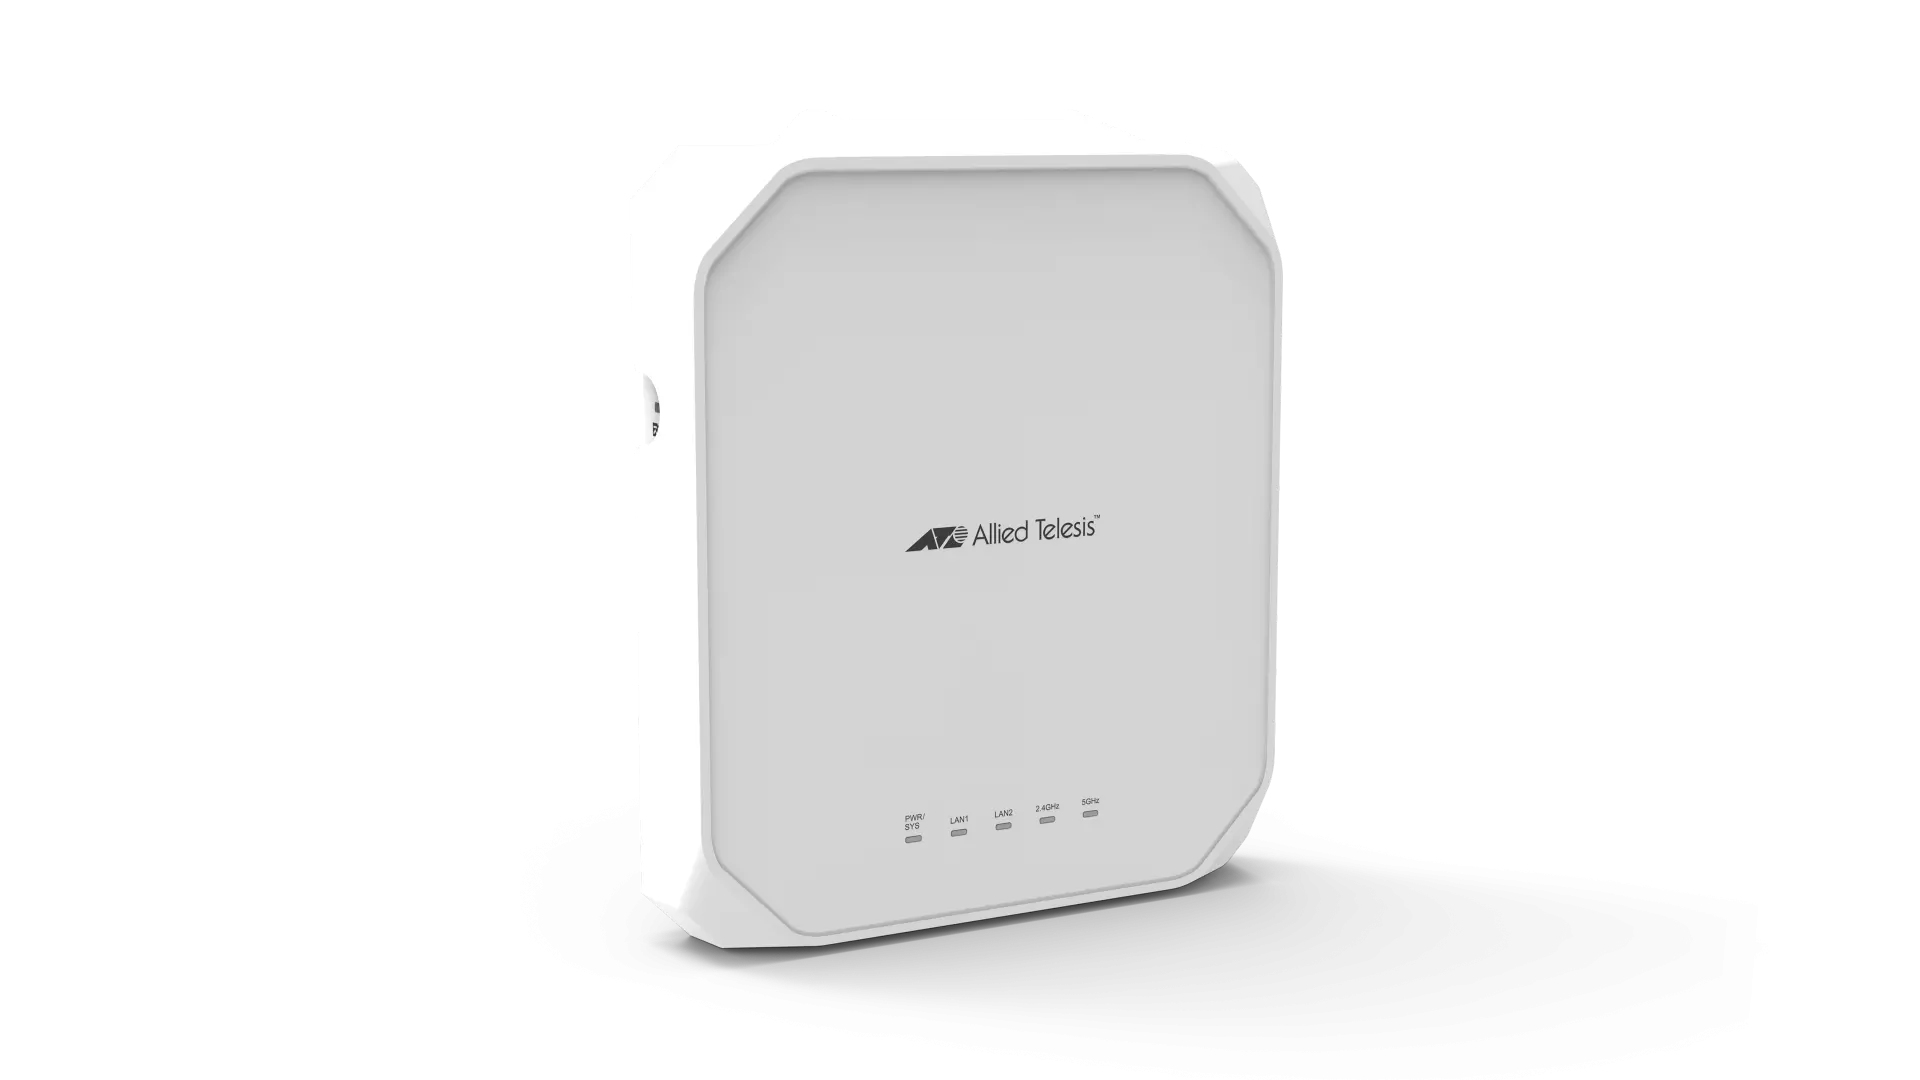 AT-TQ6702 GEN2-00 ALLIED TELESIS IEEE 802.11ax wireless access point with dual band radios and embedded antenna. This model supports Wi-Fi 6 technology with 8 spatial streams for 5GHz band. AC power adapter not included.